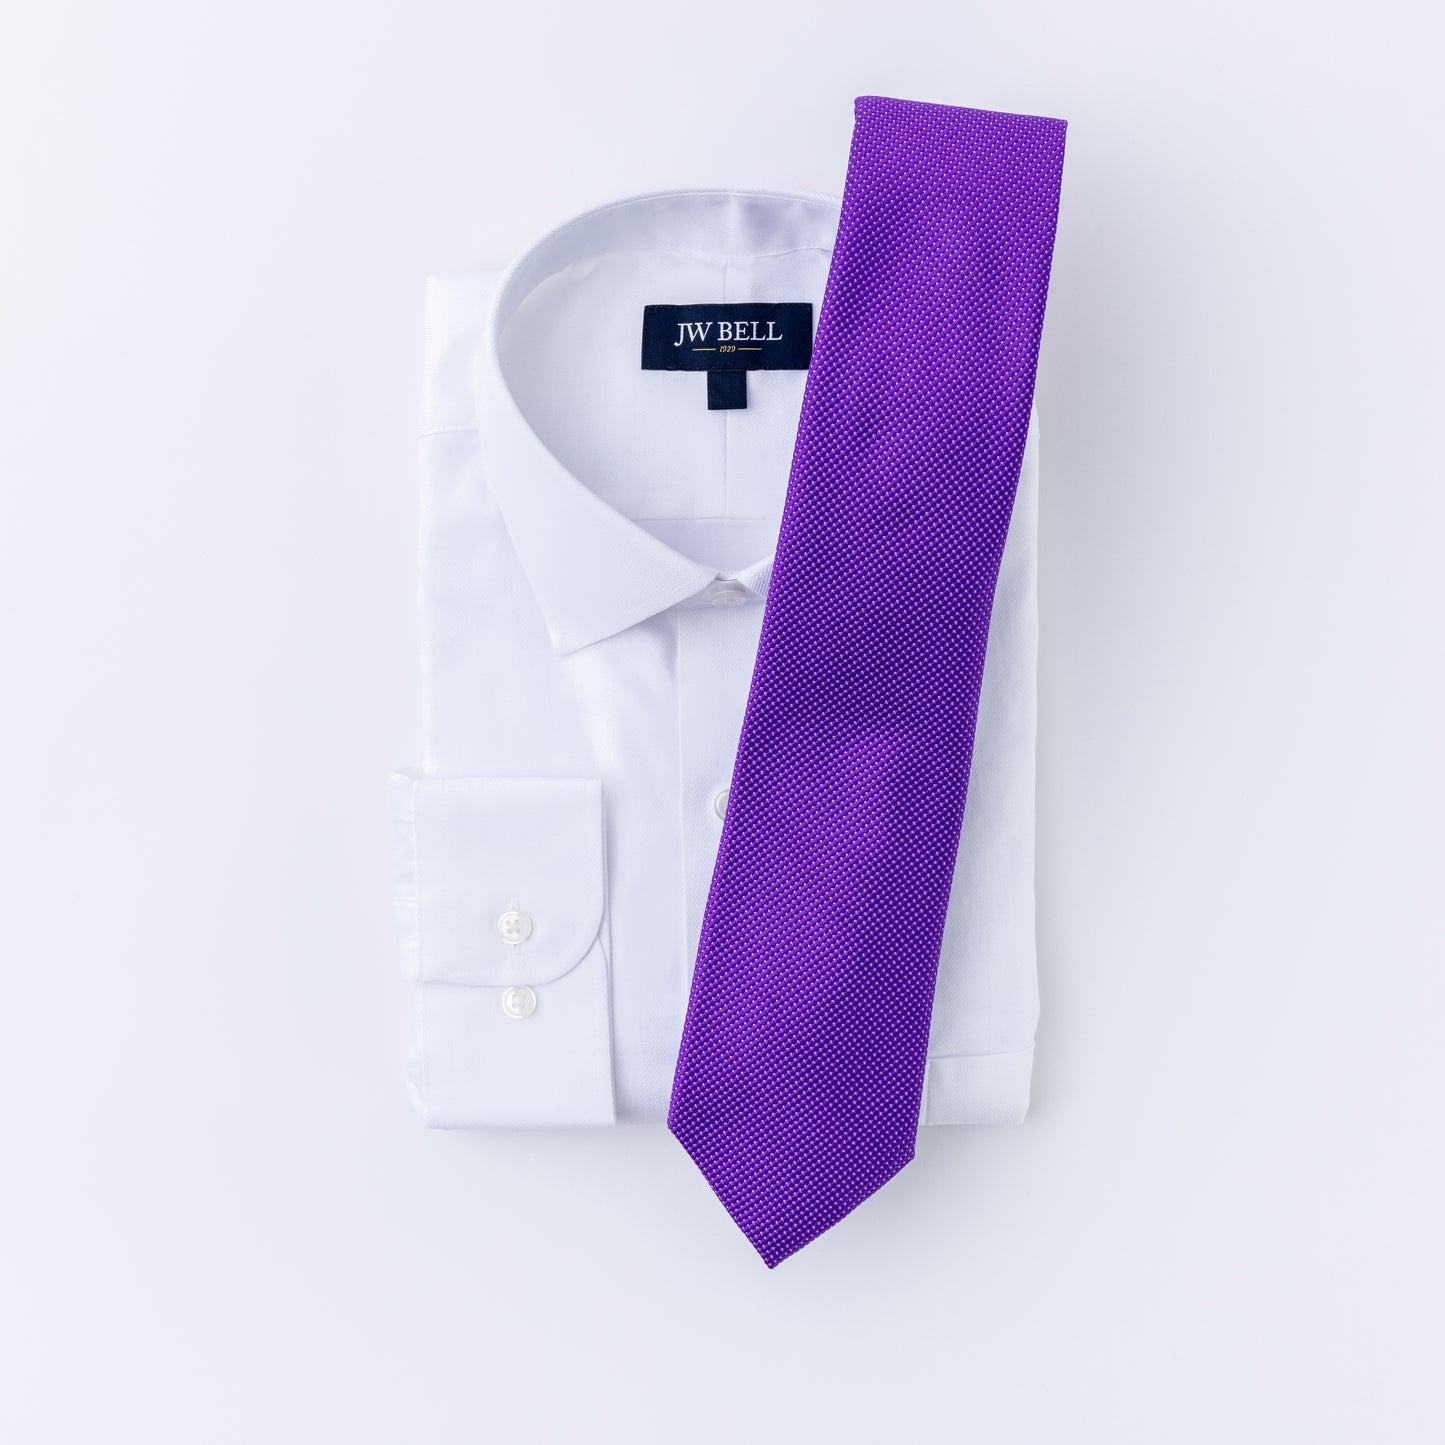 Pindot Solid Extra Long Tie